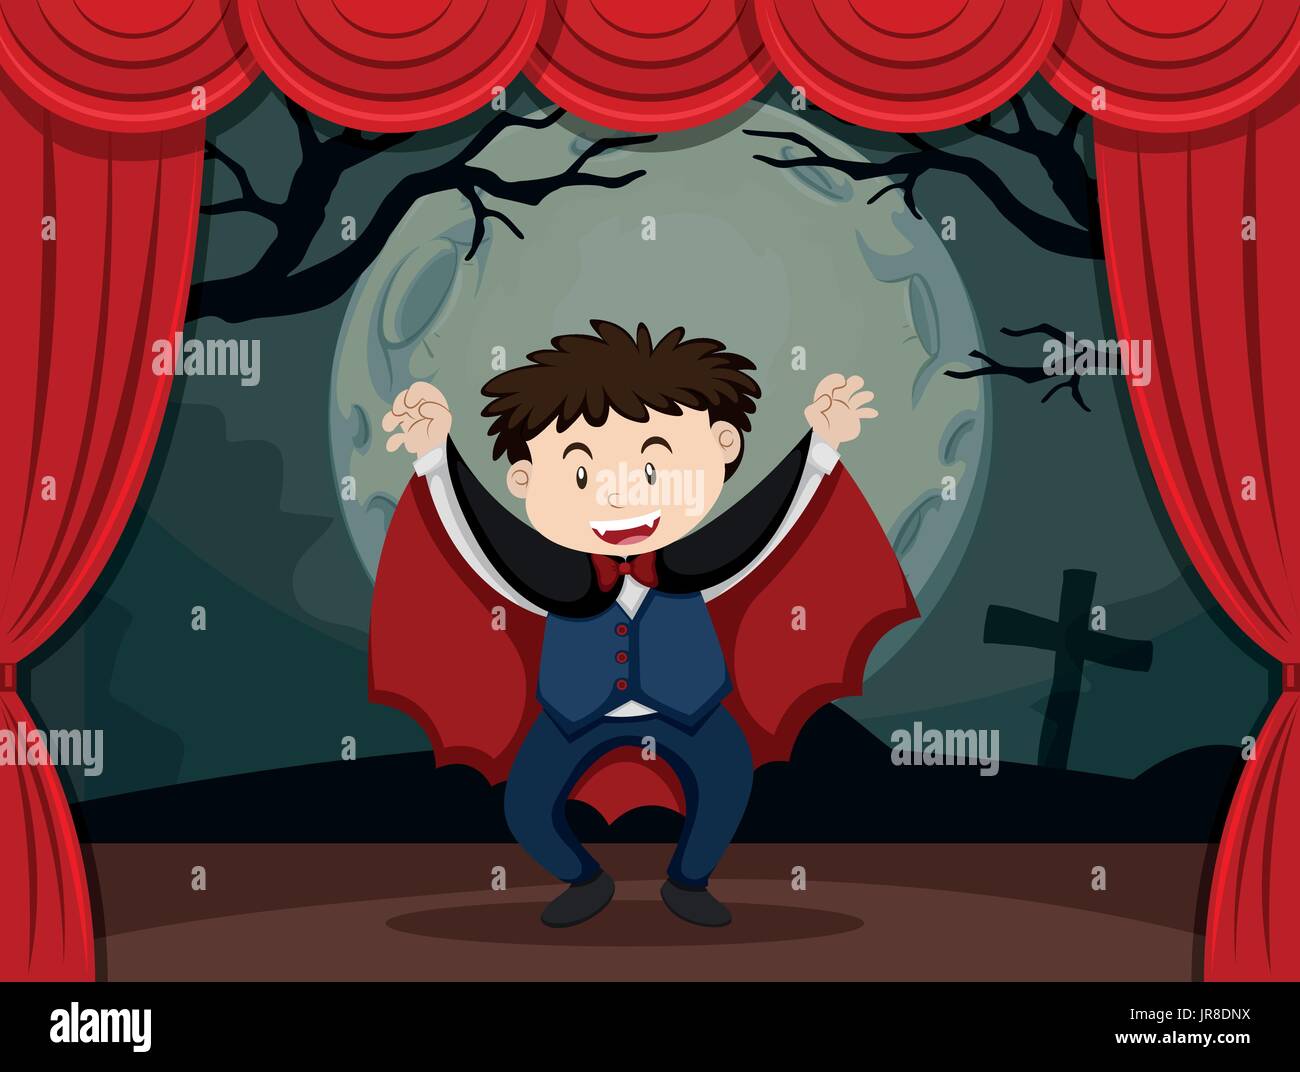 Stage play with boy in vampire costume illustration Stock Vector